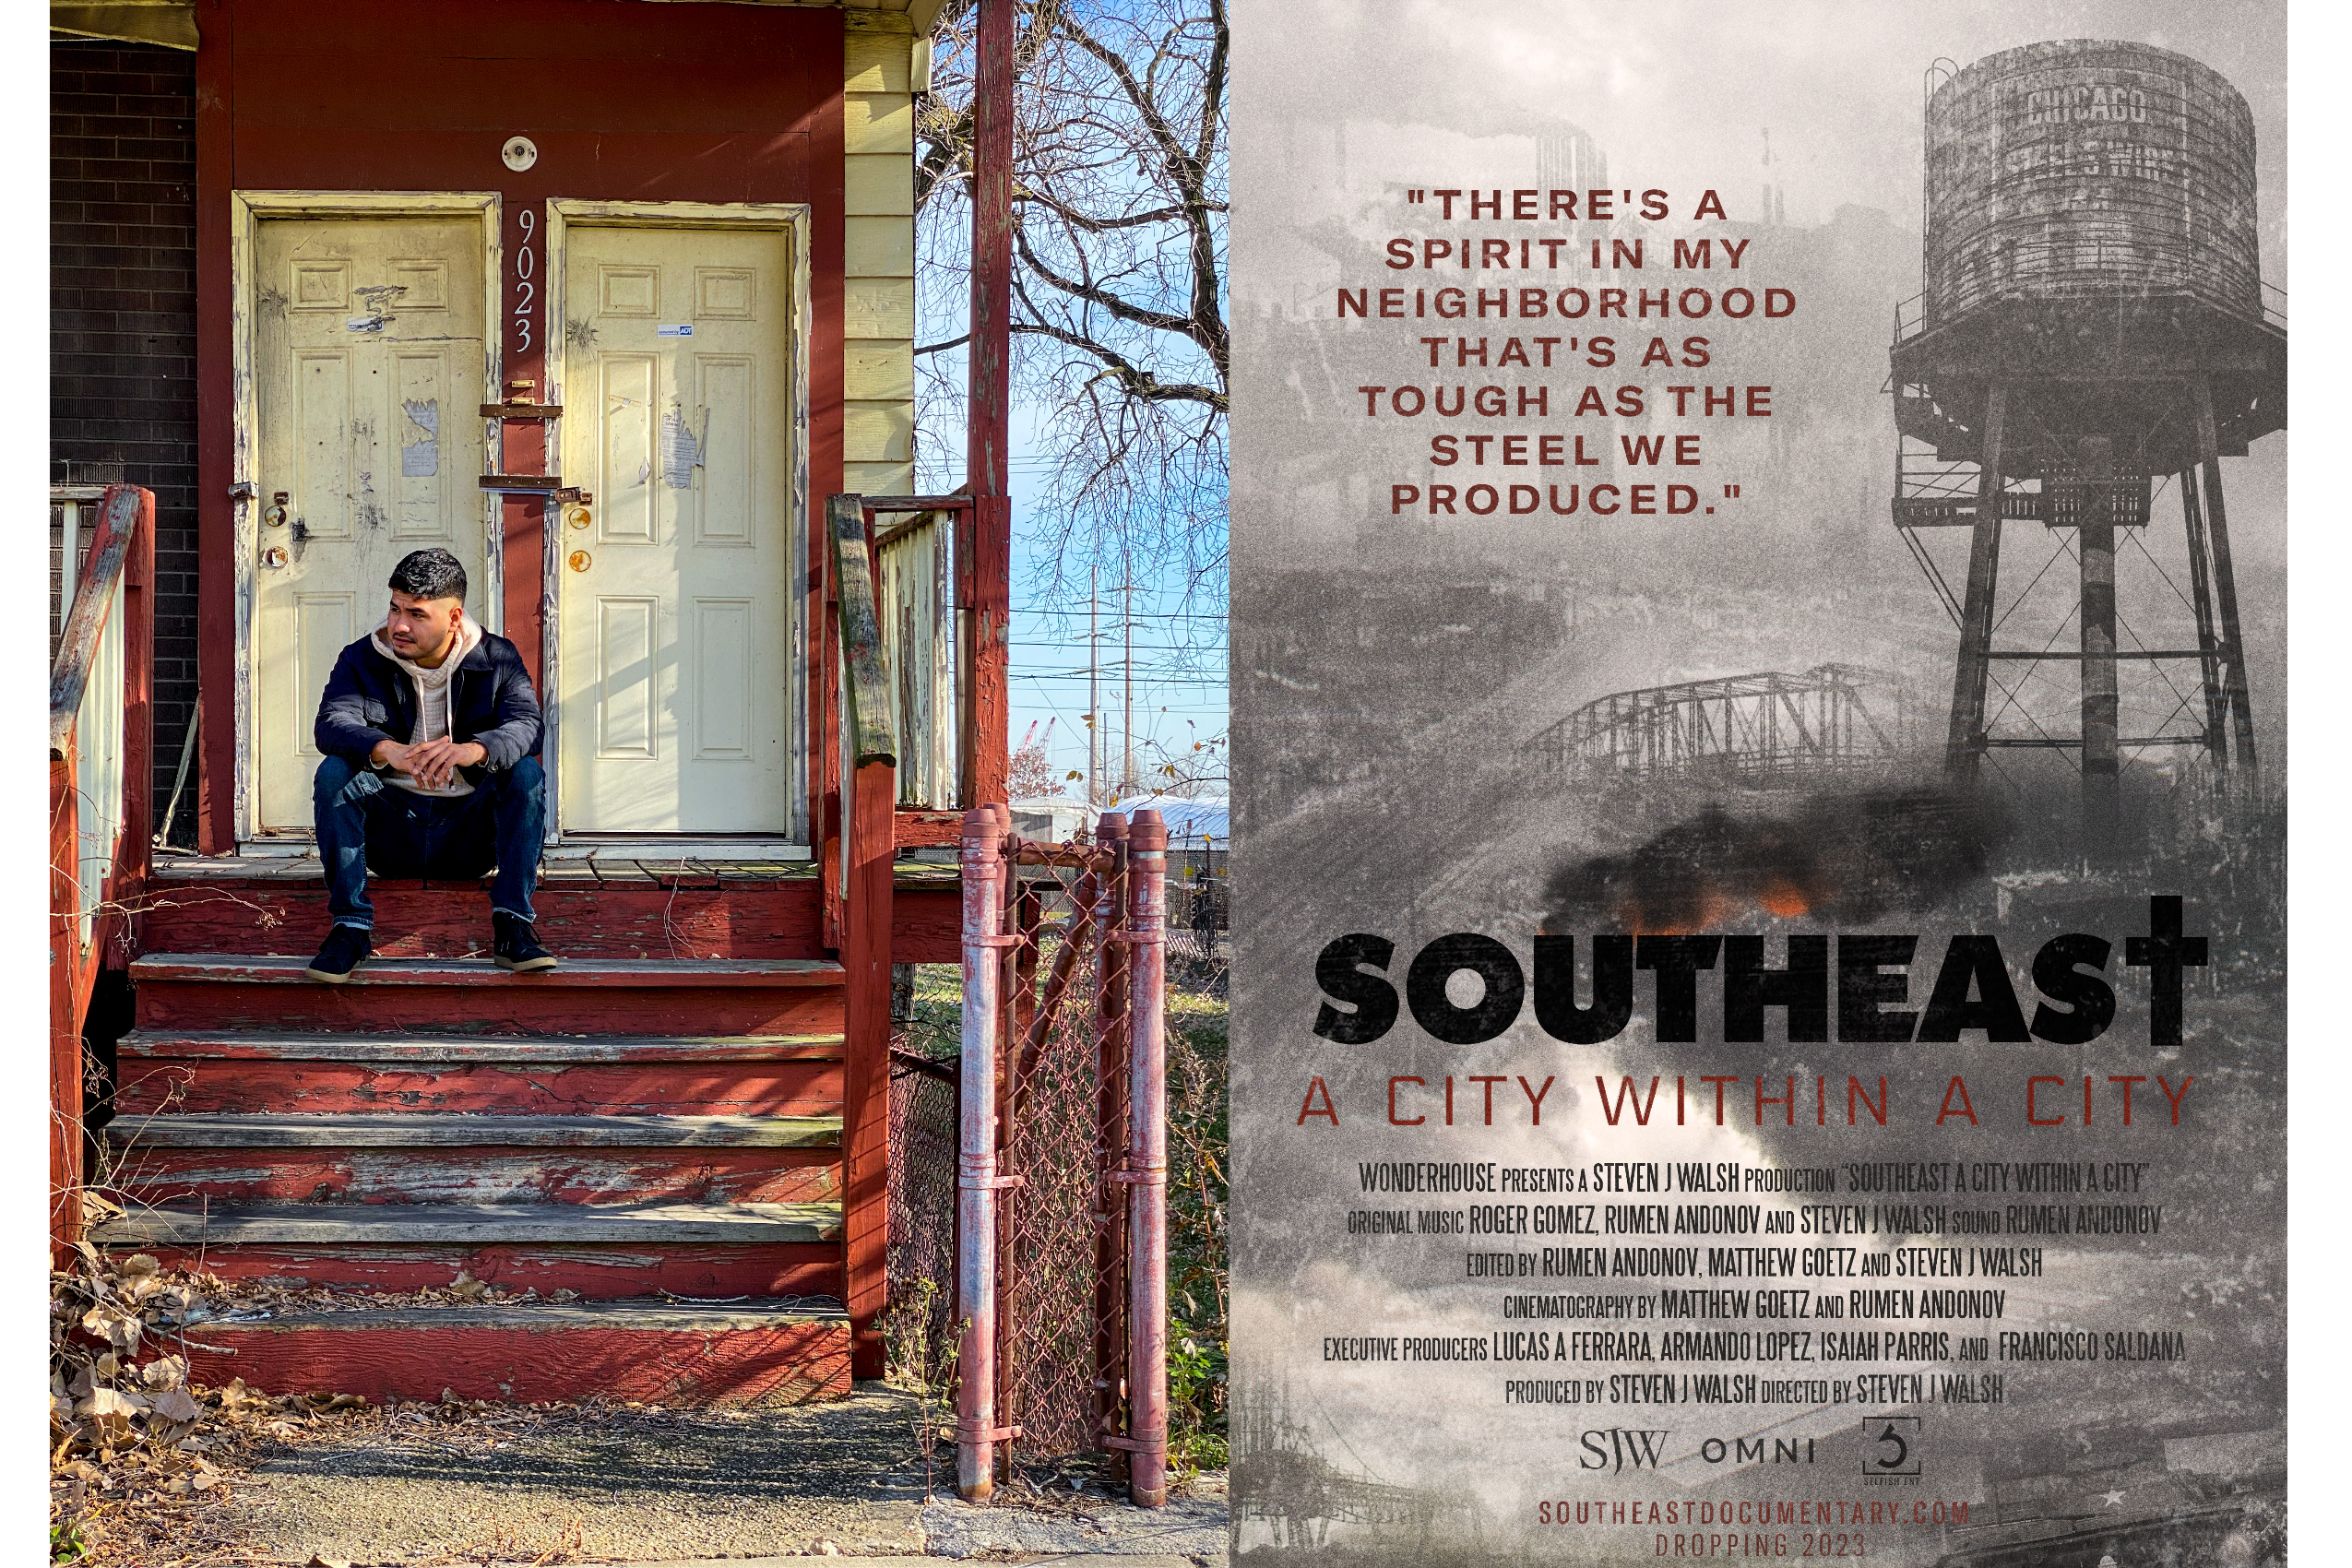 left, A man sitting on wooded steps of a house. right, movie poster for the film Southeast: A City within a City